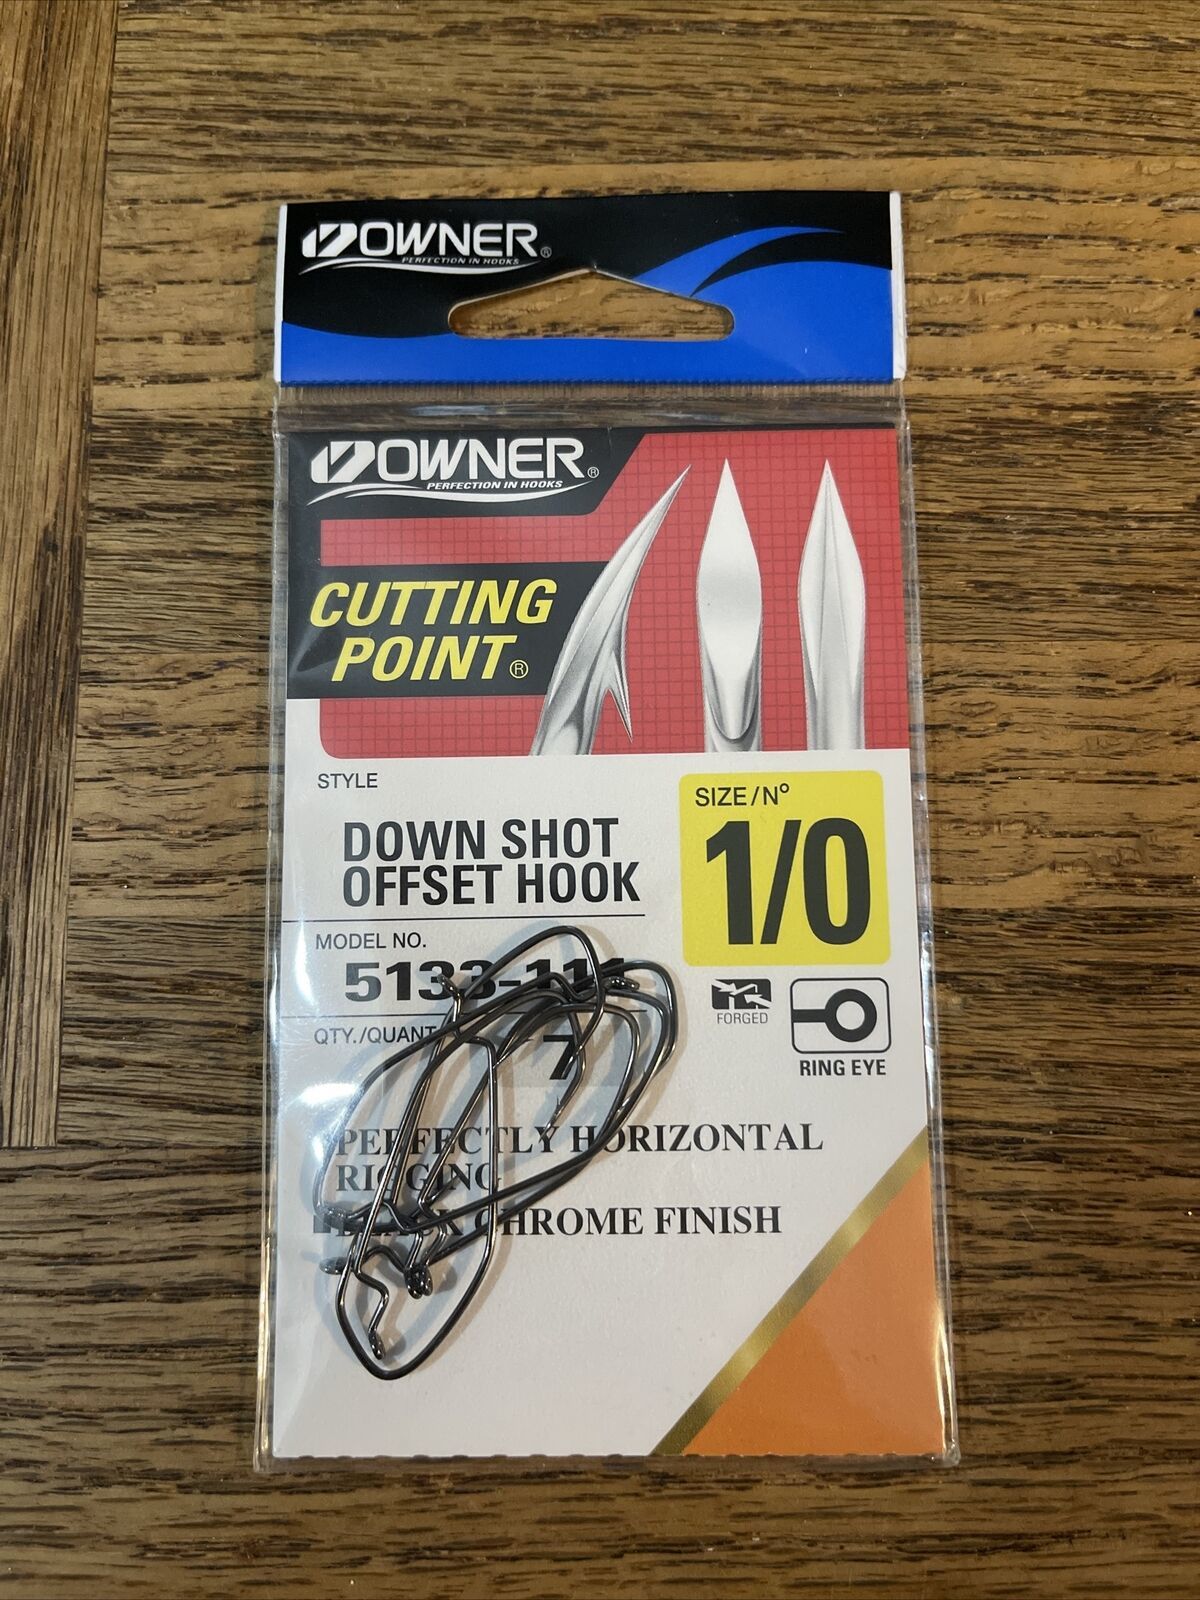 Owner cutting point down shot offset hook size 1/0